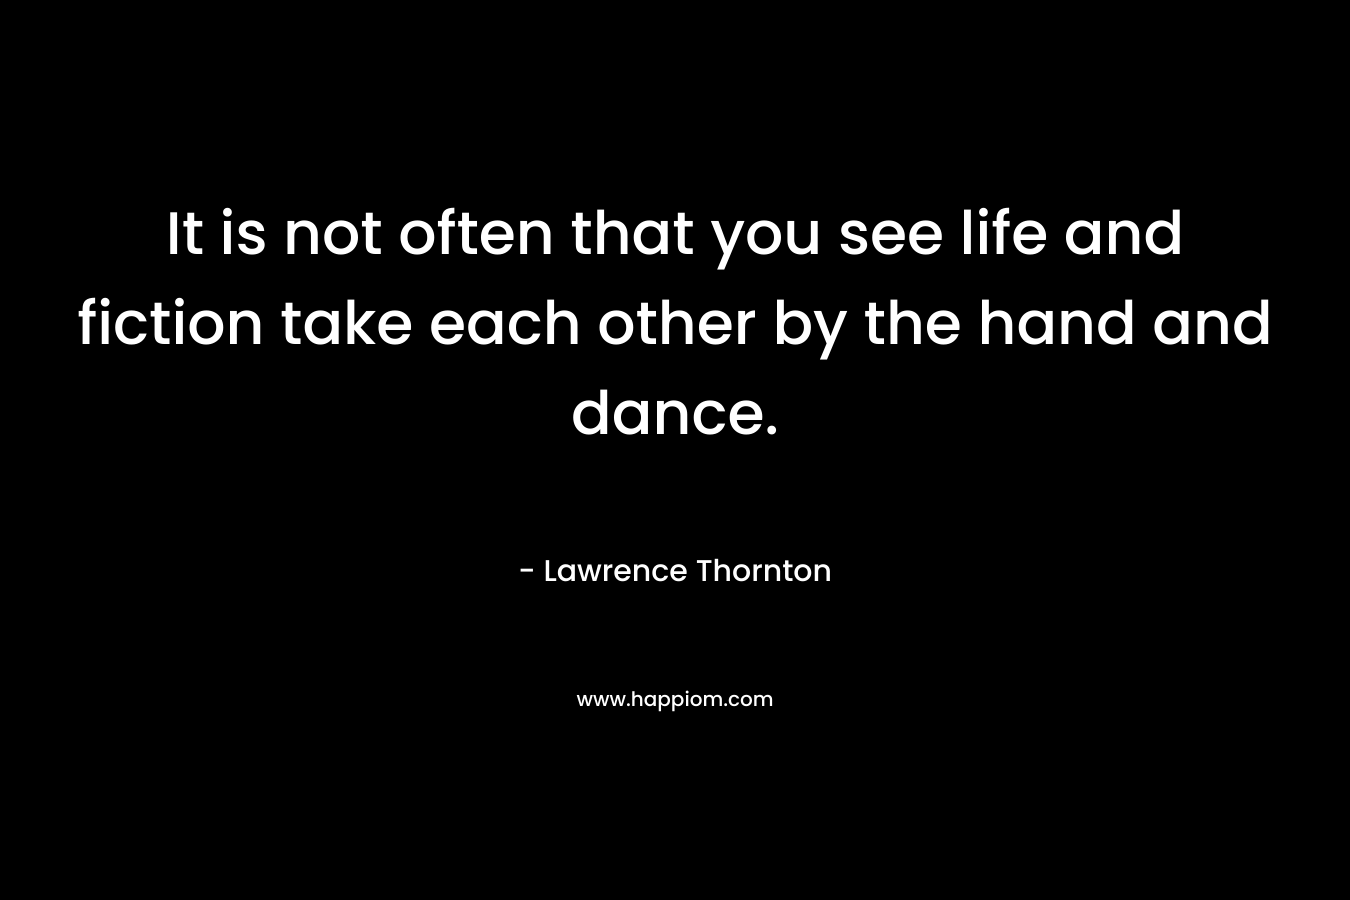 It is not often that you see life and fiction take each other by the hand and dance. – Lawrence Thornton